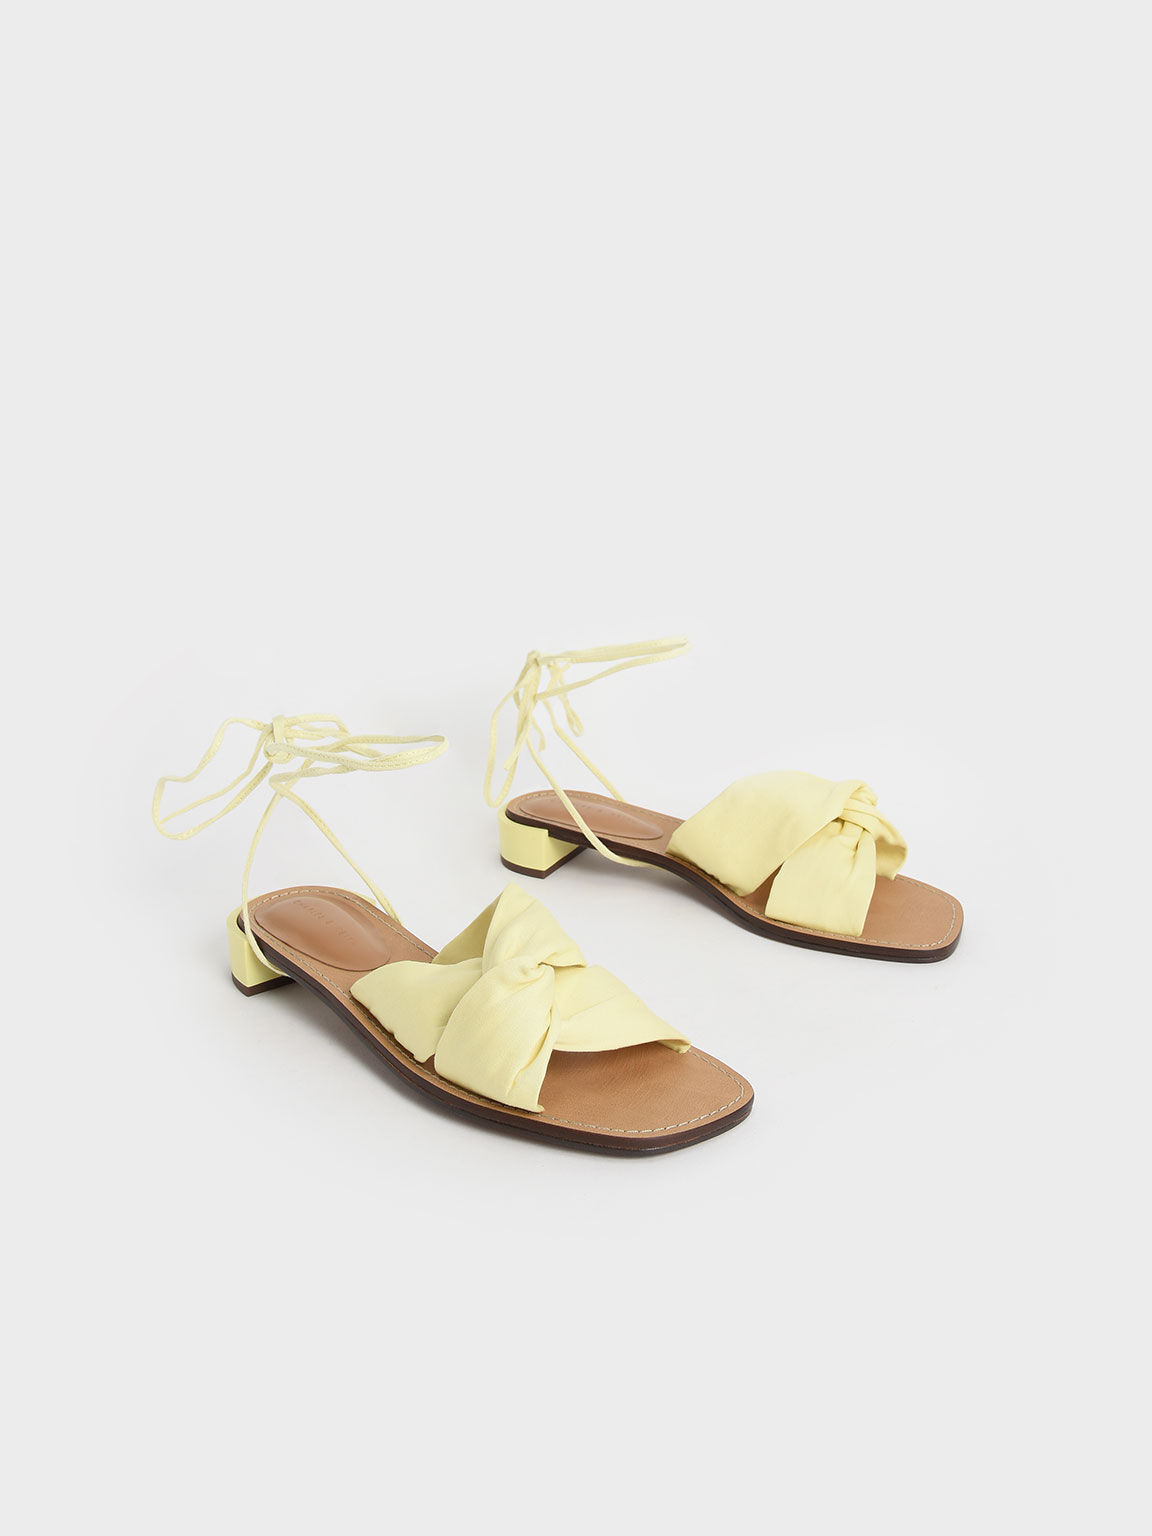 Sandal Knotted Tie-Around, Yellow, hi-res